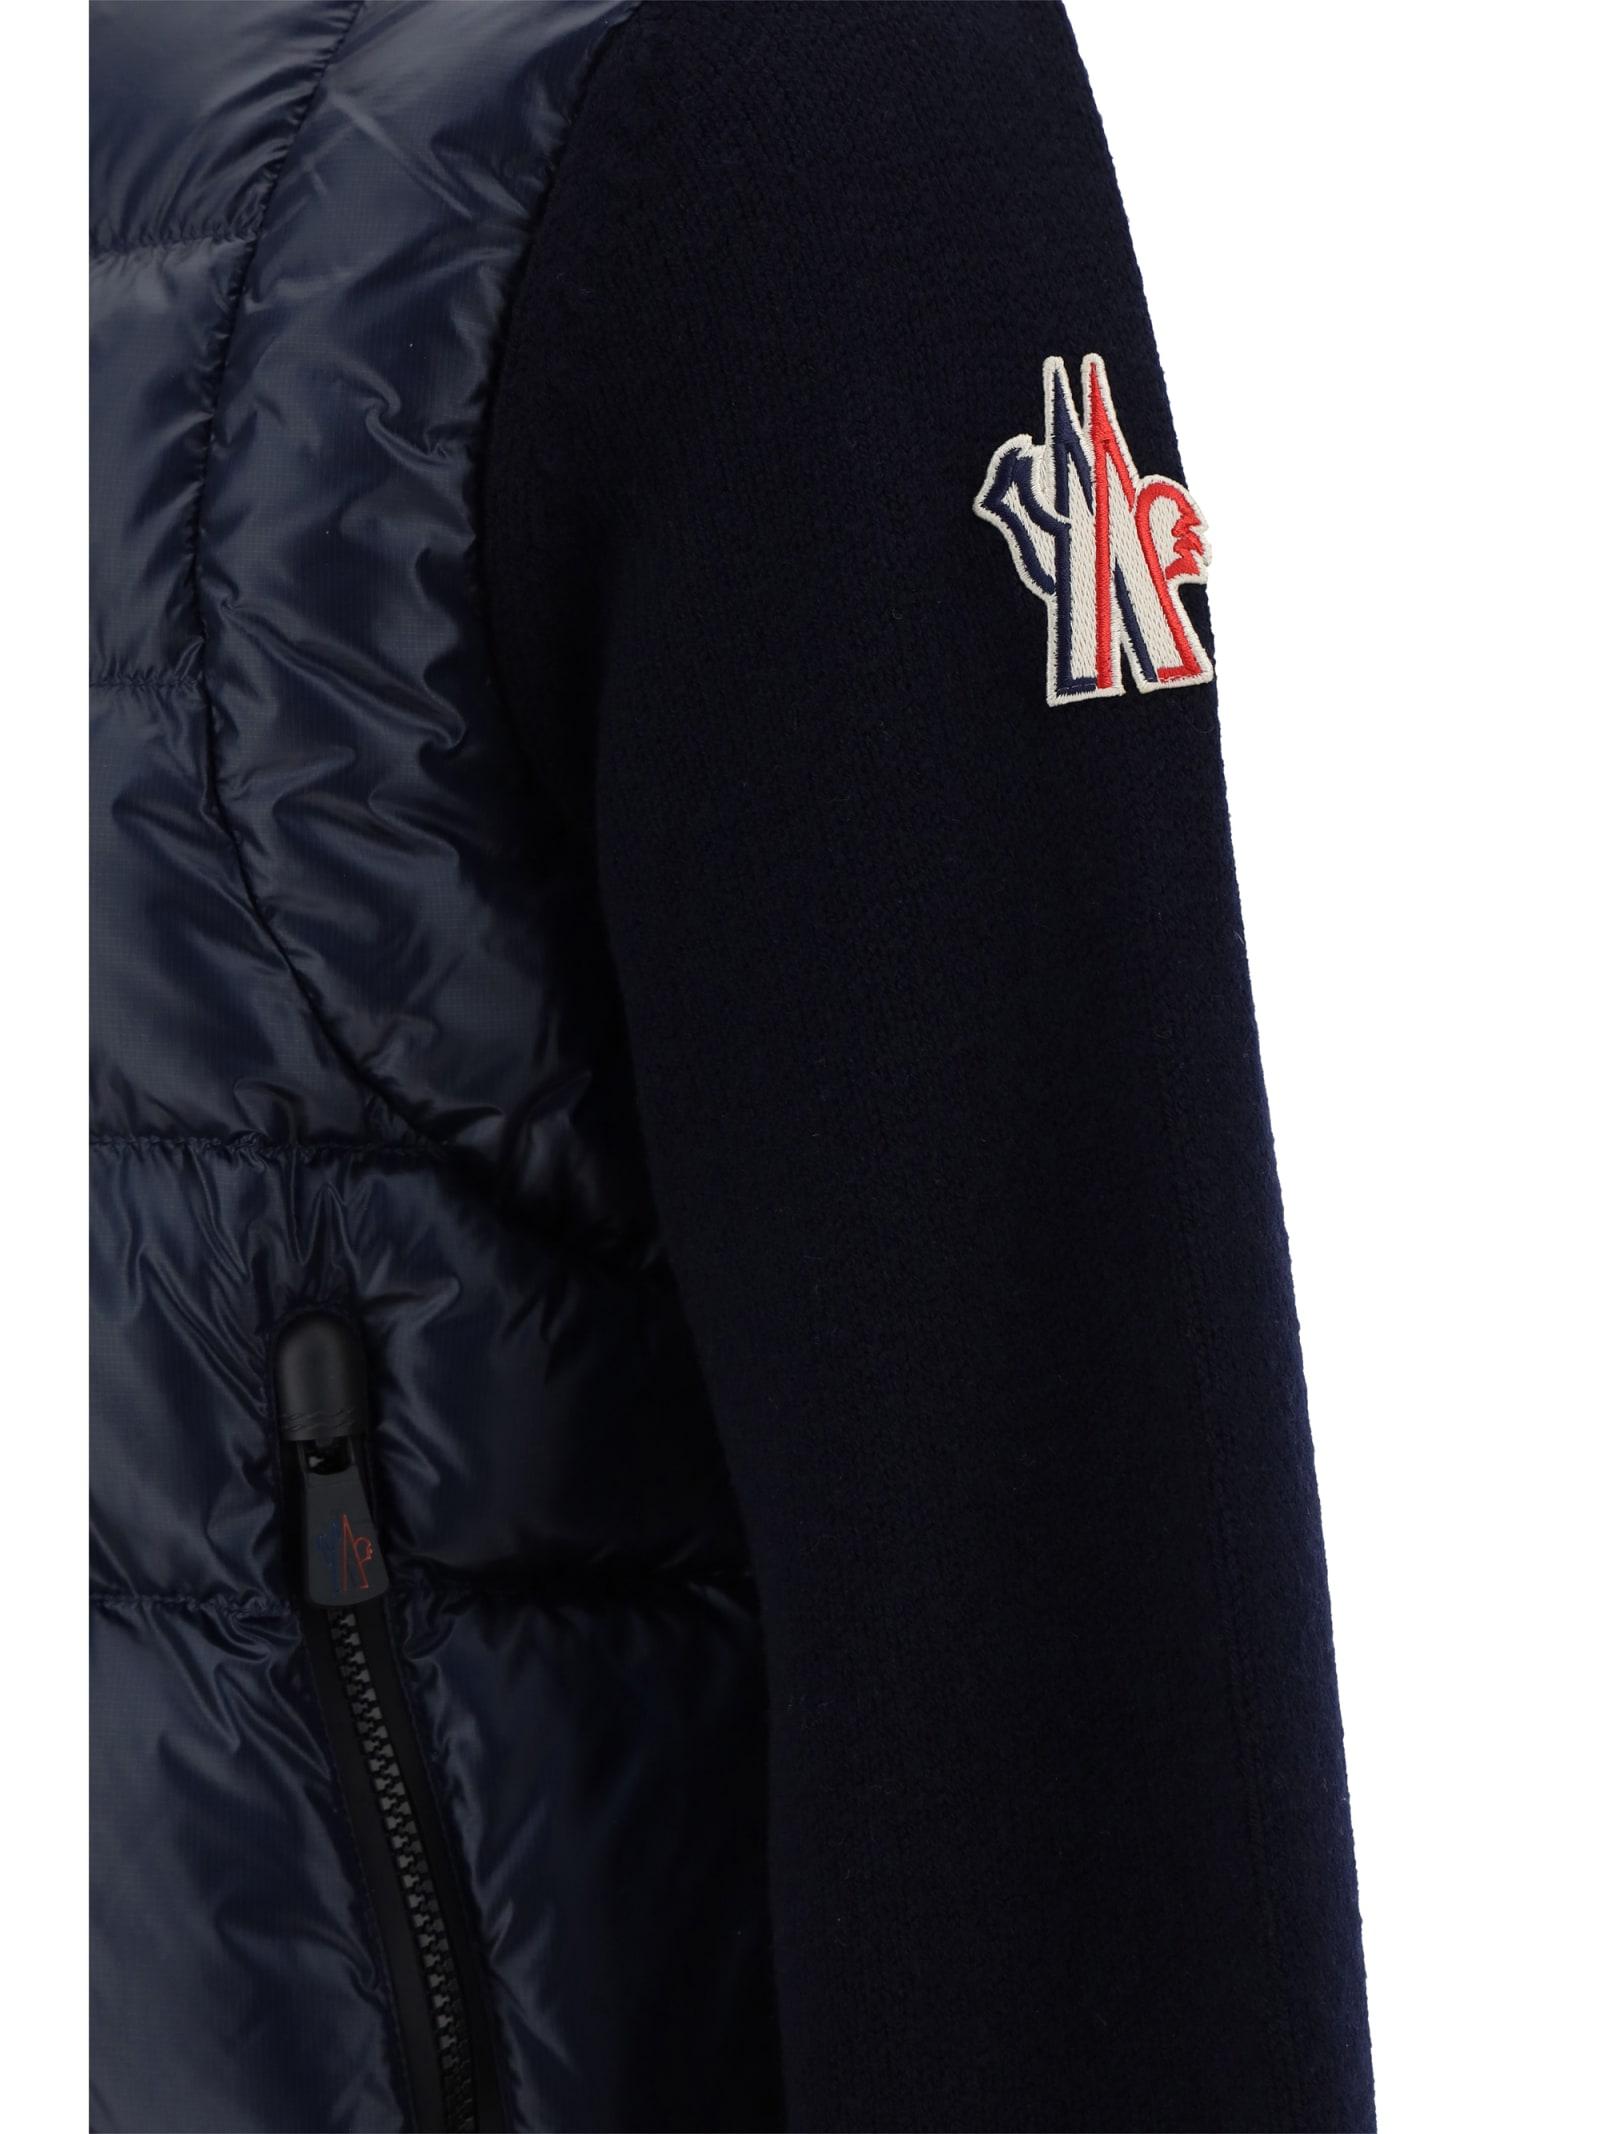 3 MONCLER GRENOBLE Tricot Down Jacket in Blue for Men | Lyst